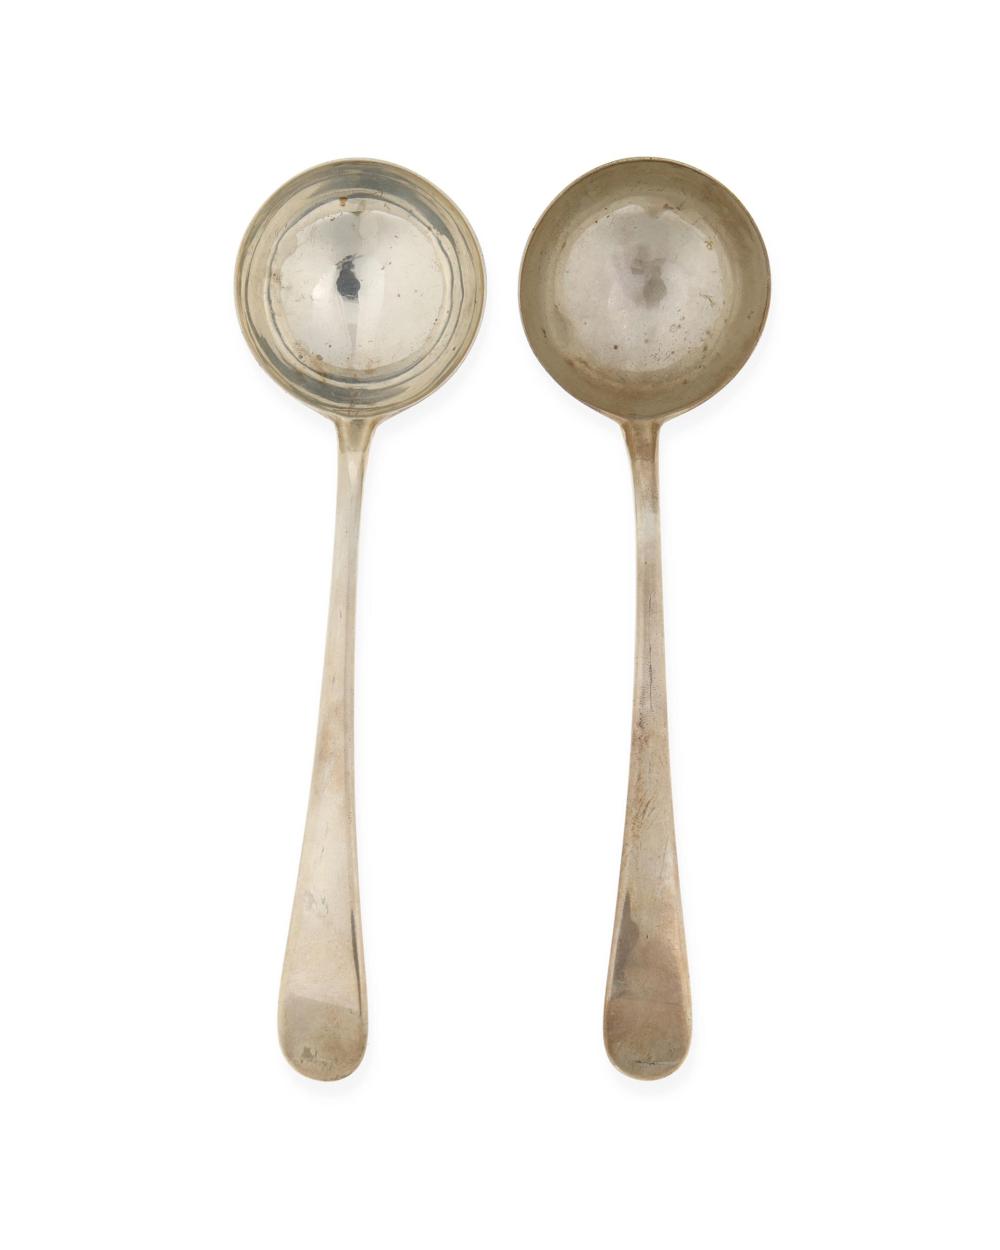 A PAIR OF GEORGIAN ENGLISH STERLING 2ee4f4